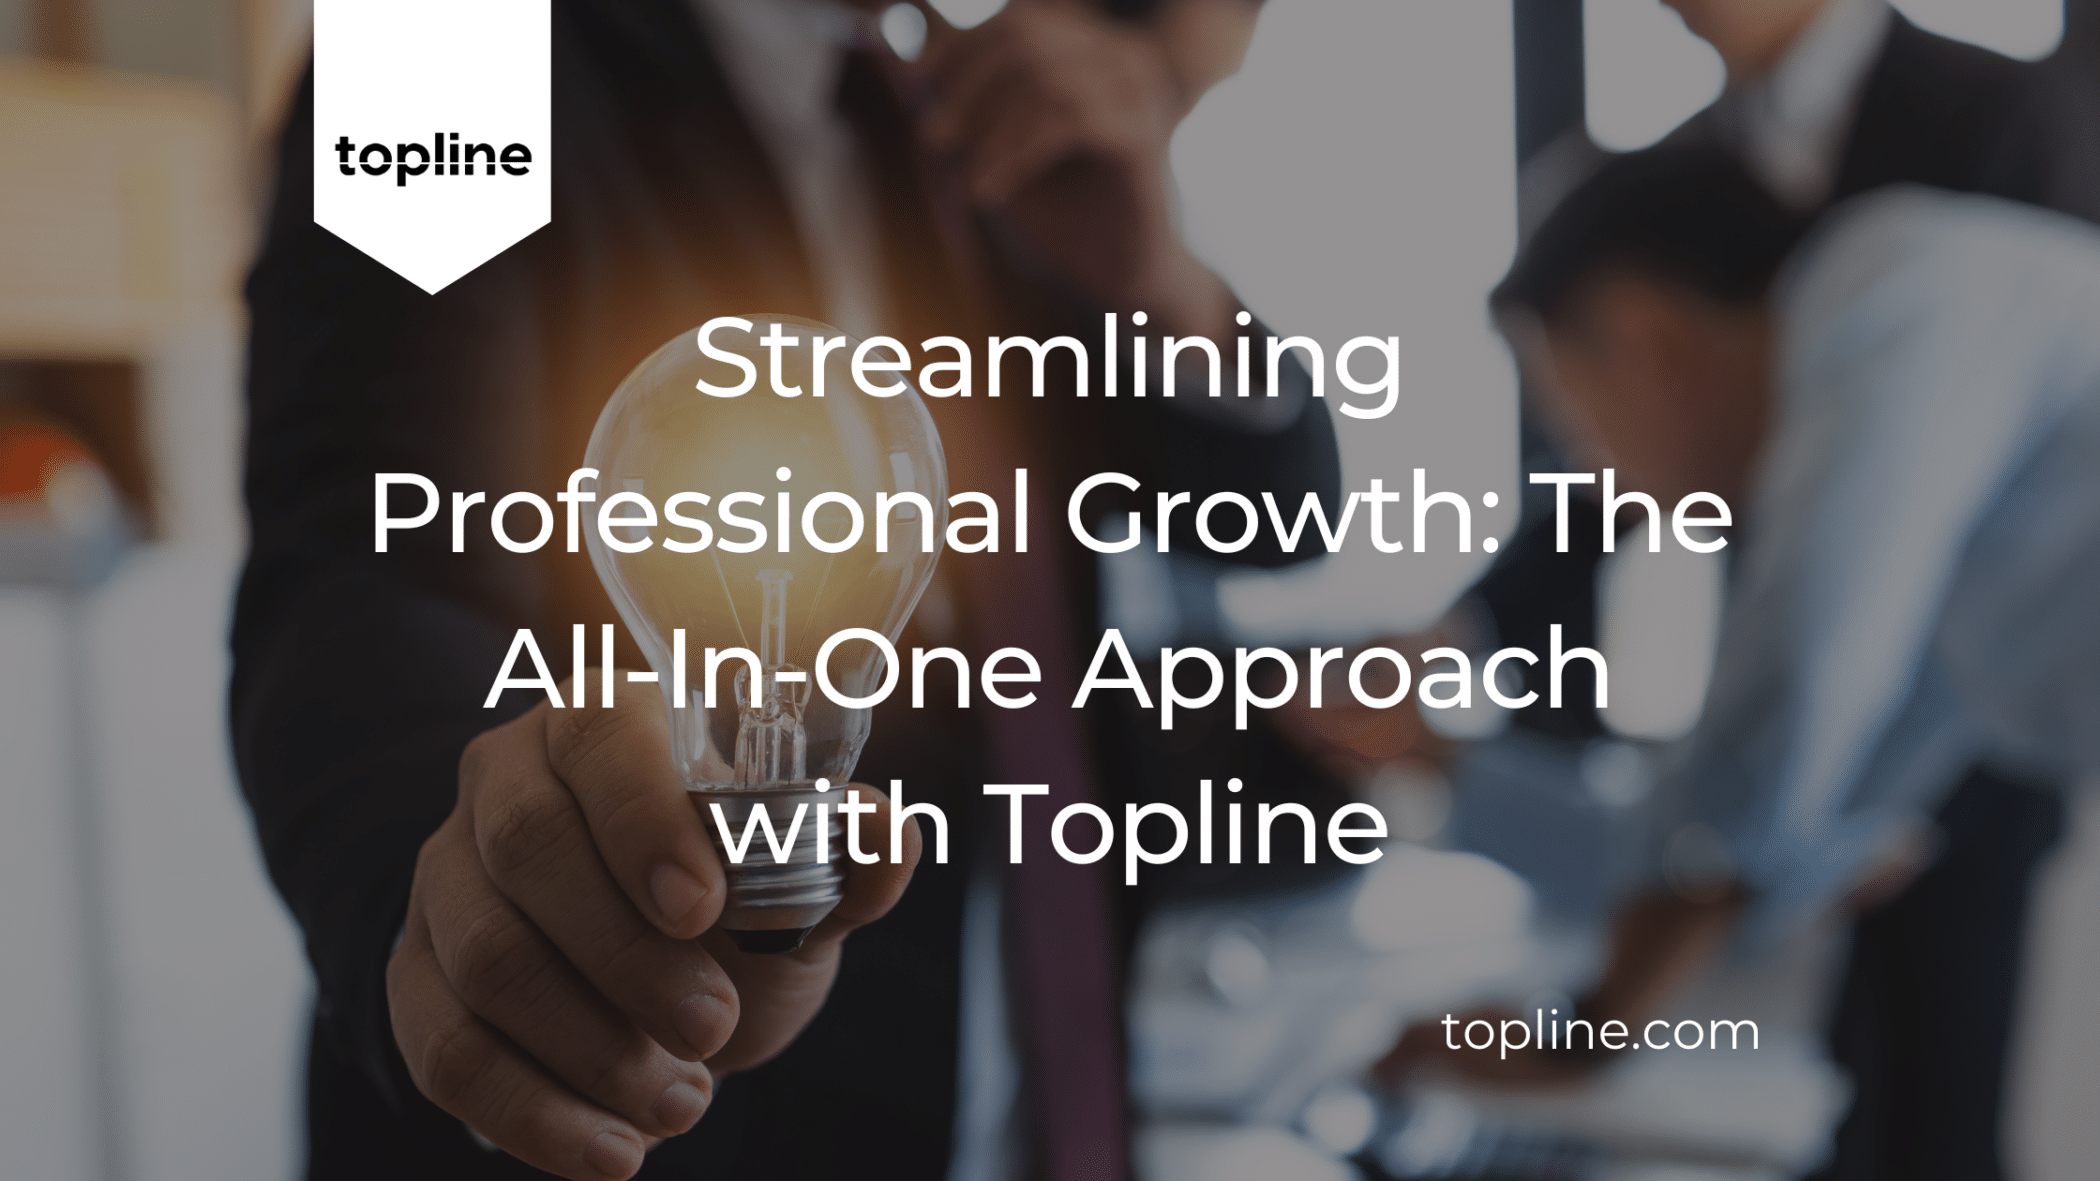 Streamlining Professional Growth: The All-In-One Approach with Topline